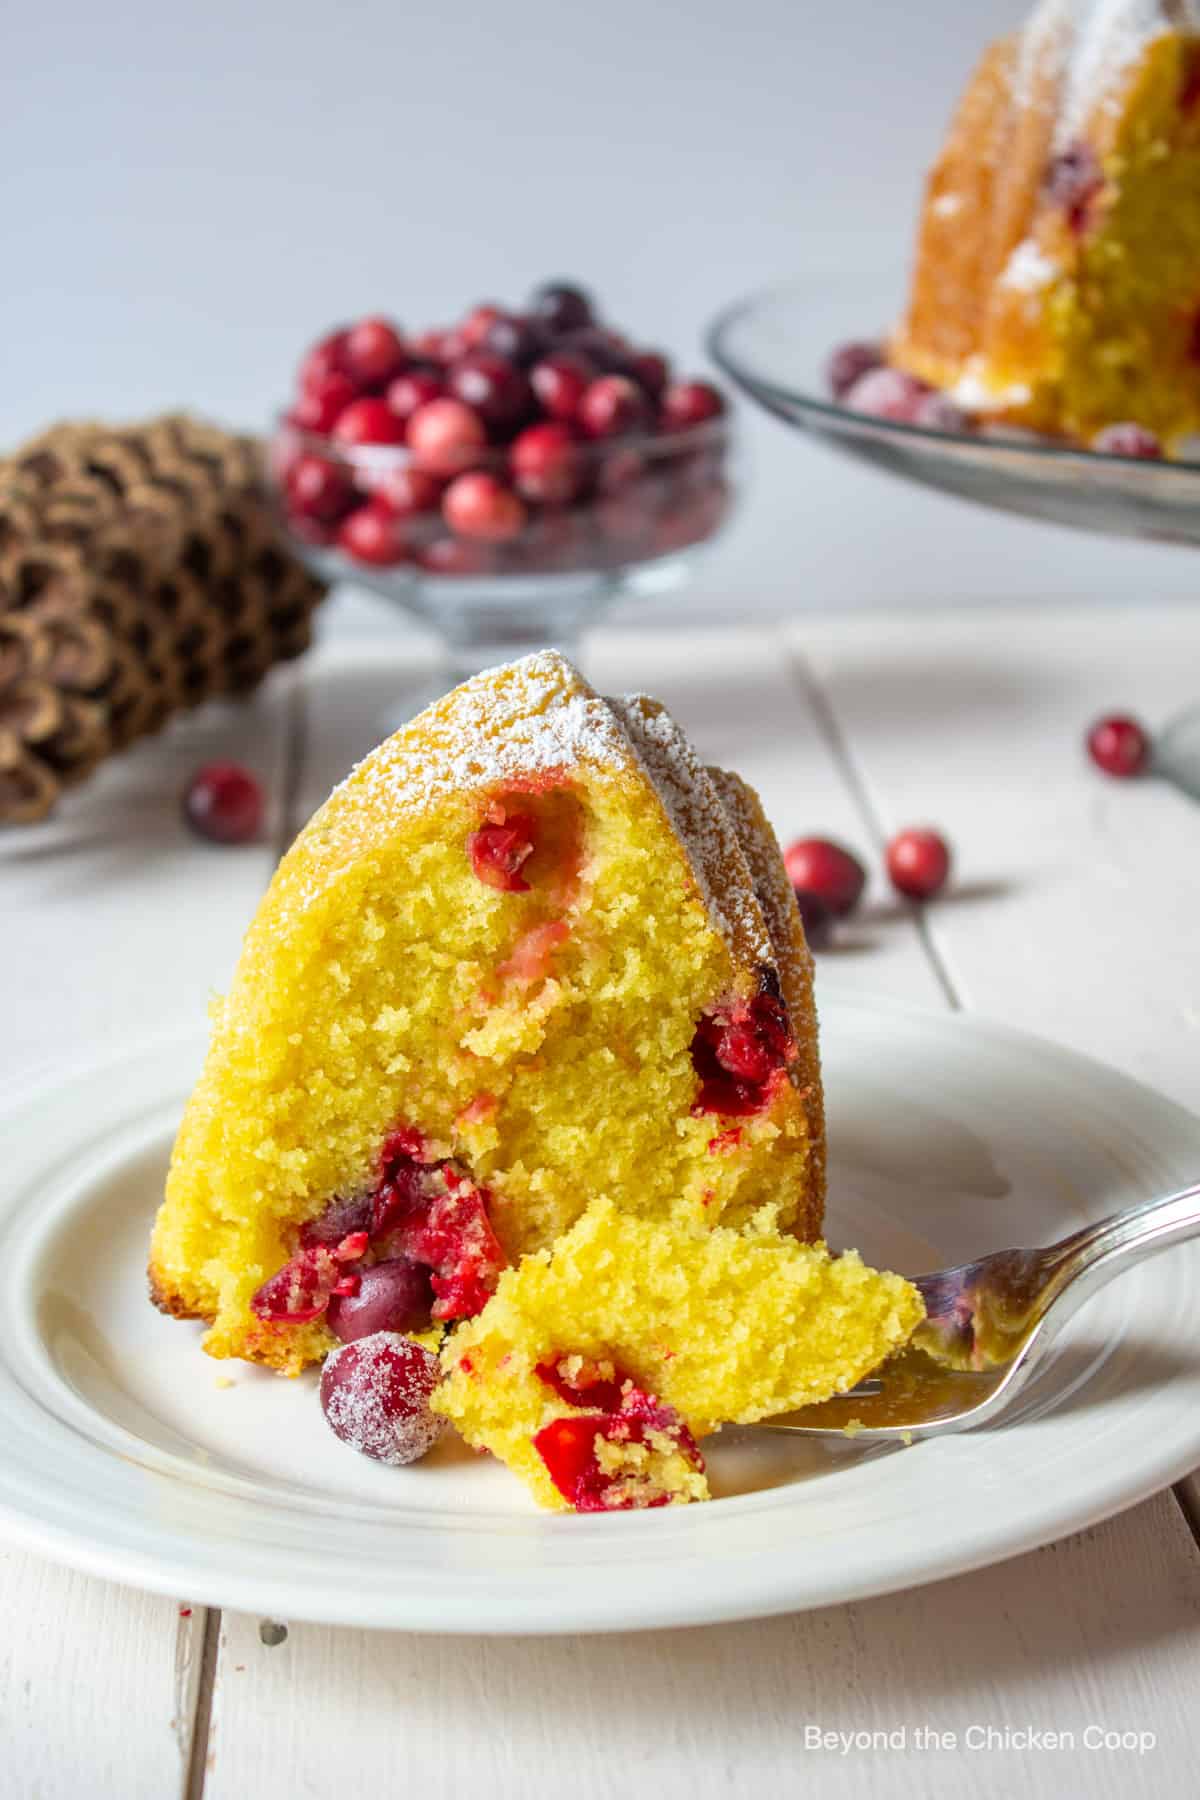 A slice of cake filled with cranberries.